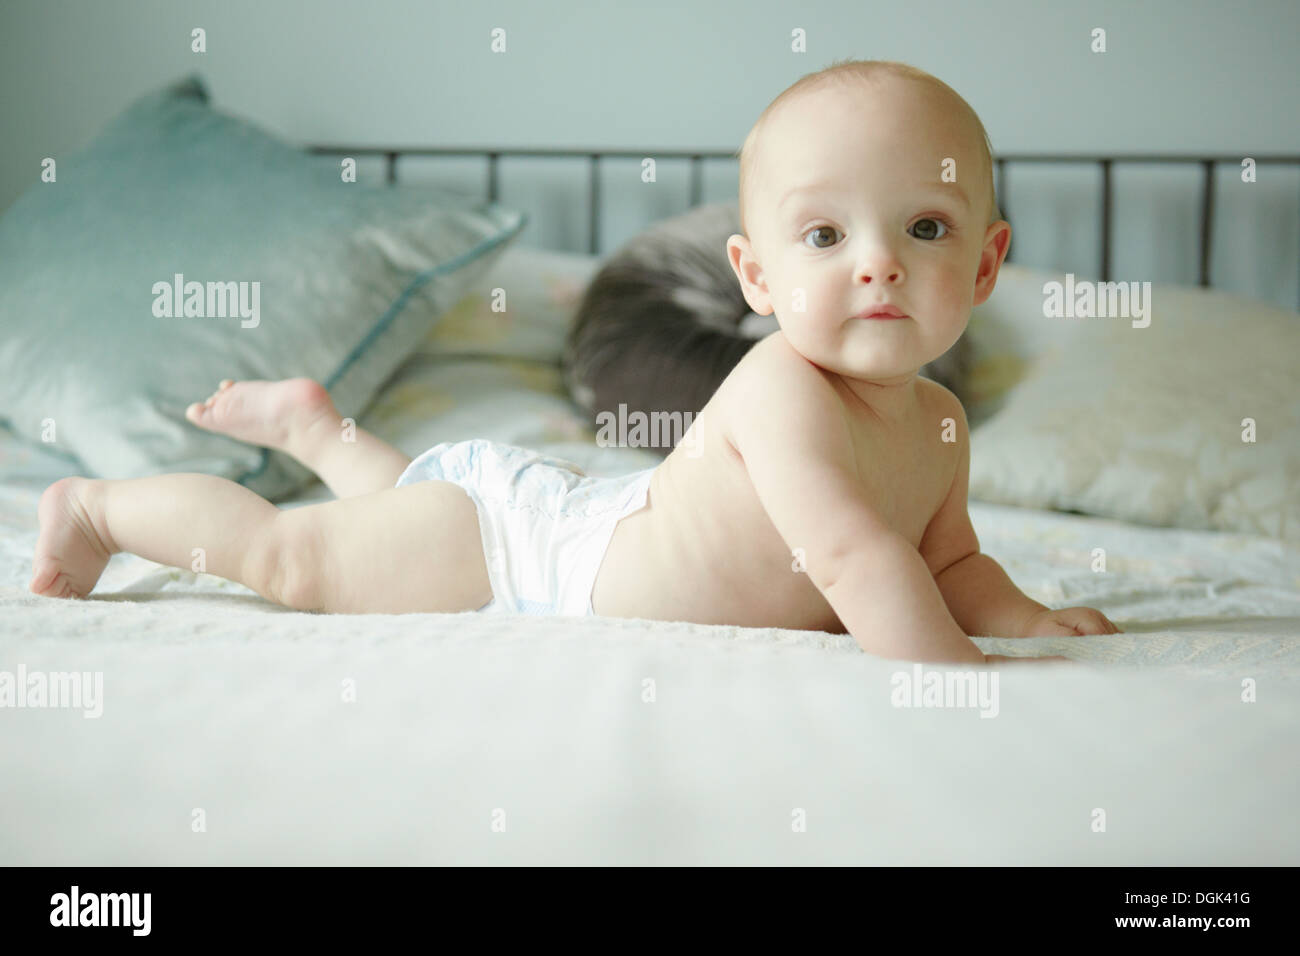 Baby Boy lying on/on bed Banque D'Images